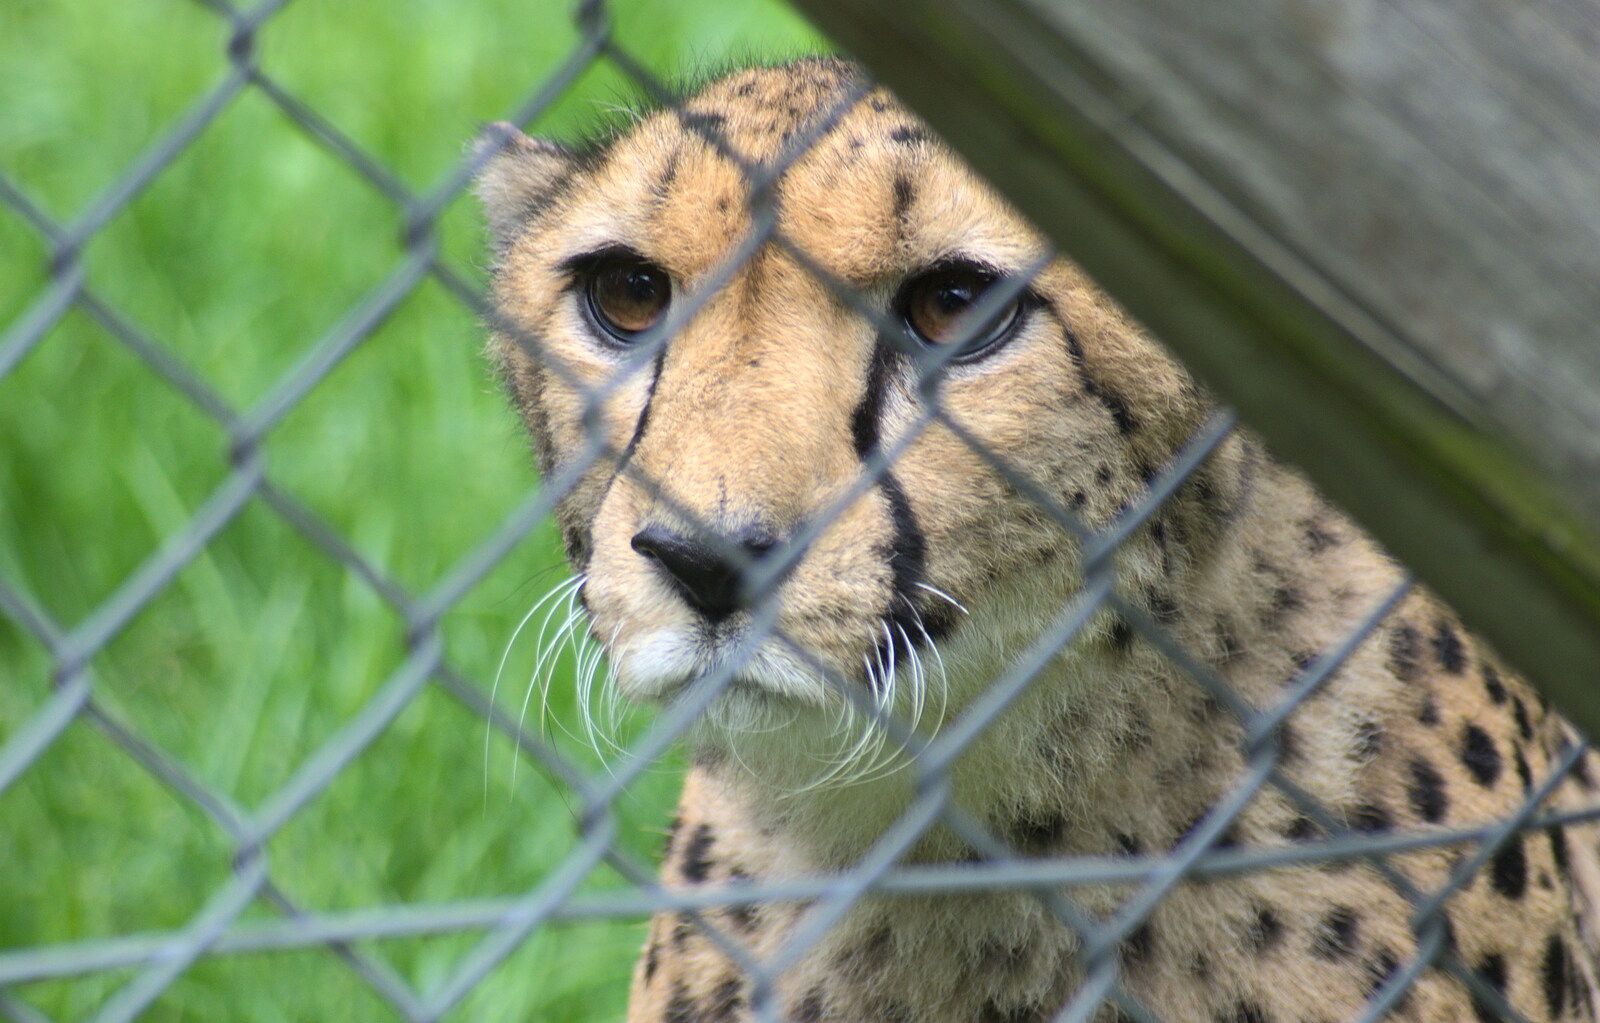 A Cheetah looks through a wire fence from Another Trip to Banham Zoo, Banham, Norfolk - 6th June 2012